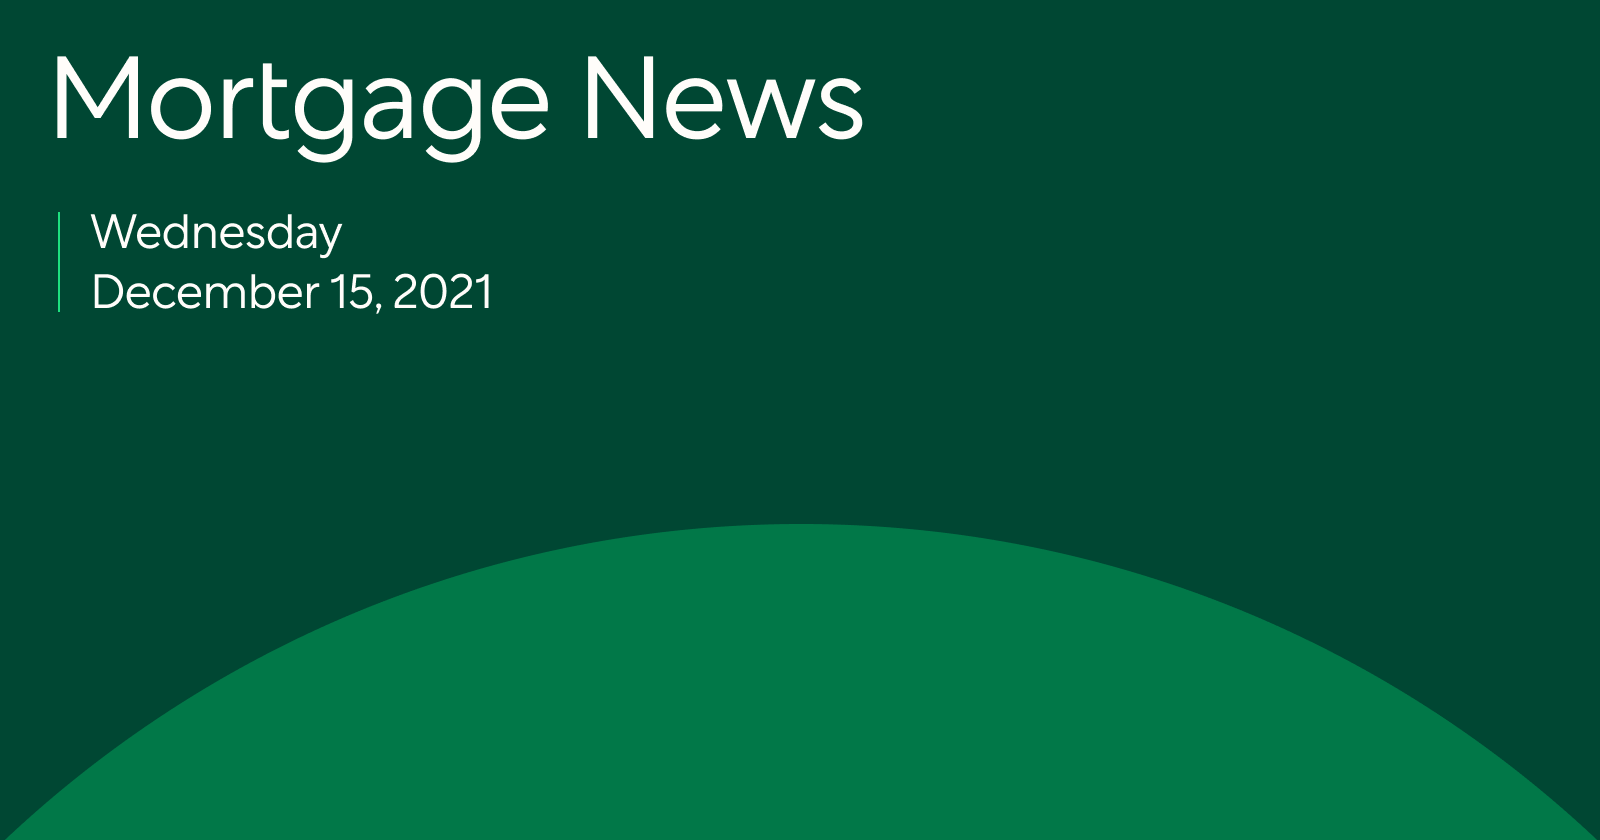 Mortgage News: The Fed Expects To Hike Rates Faster In 2022